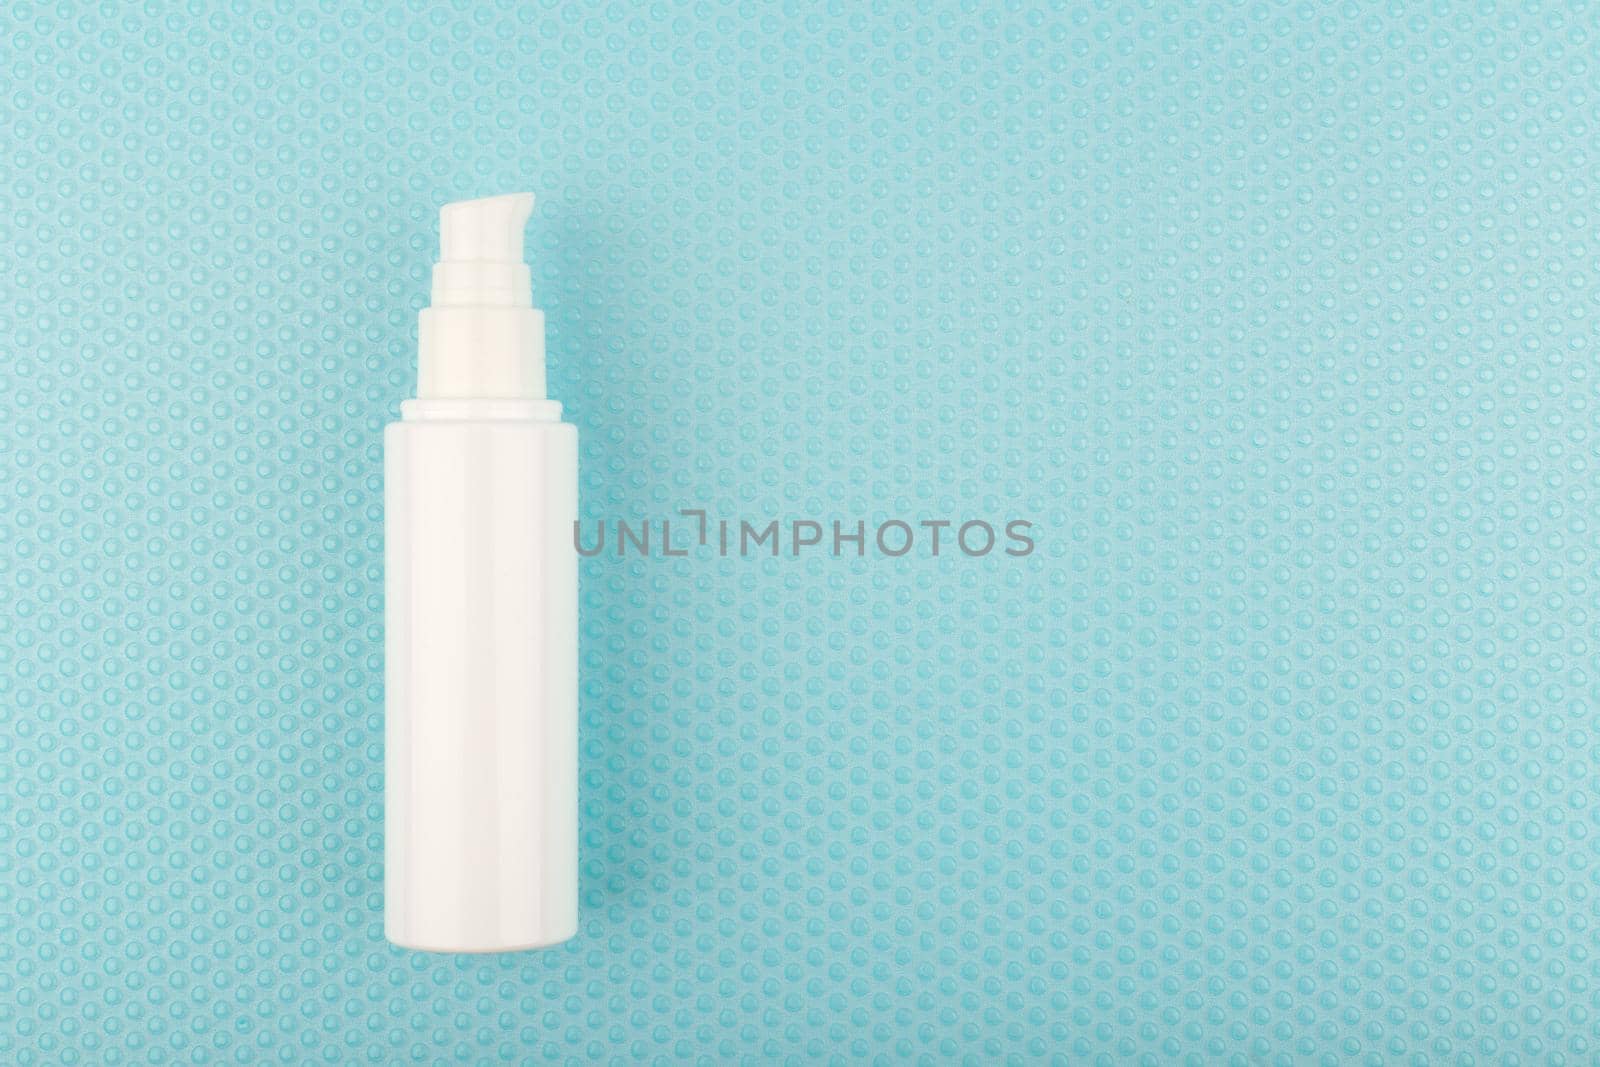 Flat lay with face moisturizing cream or lotion in tall white plastic tube on blue background with bubbles with copy space. Concept of skin treatment for smooth, glowing, young looking skin